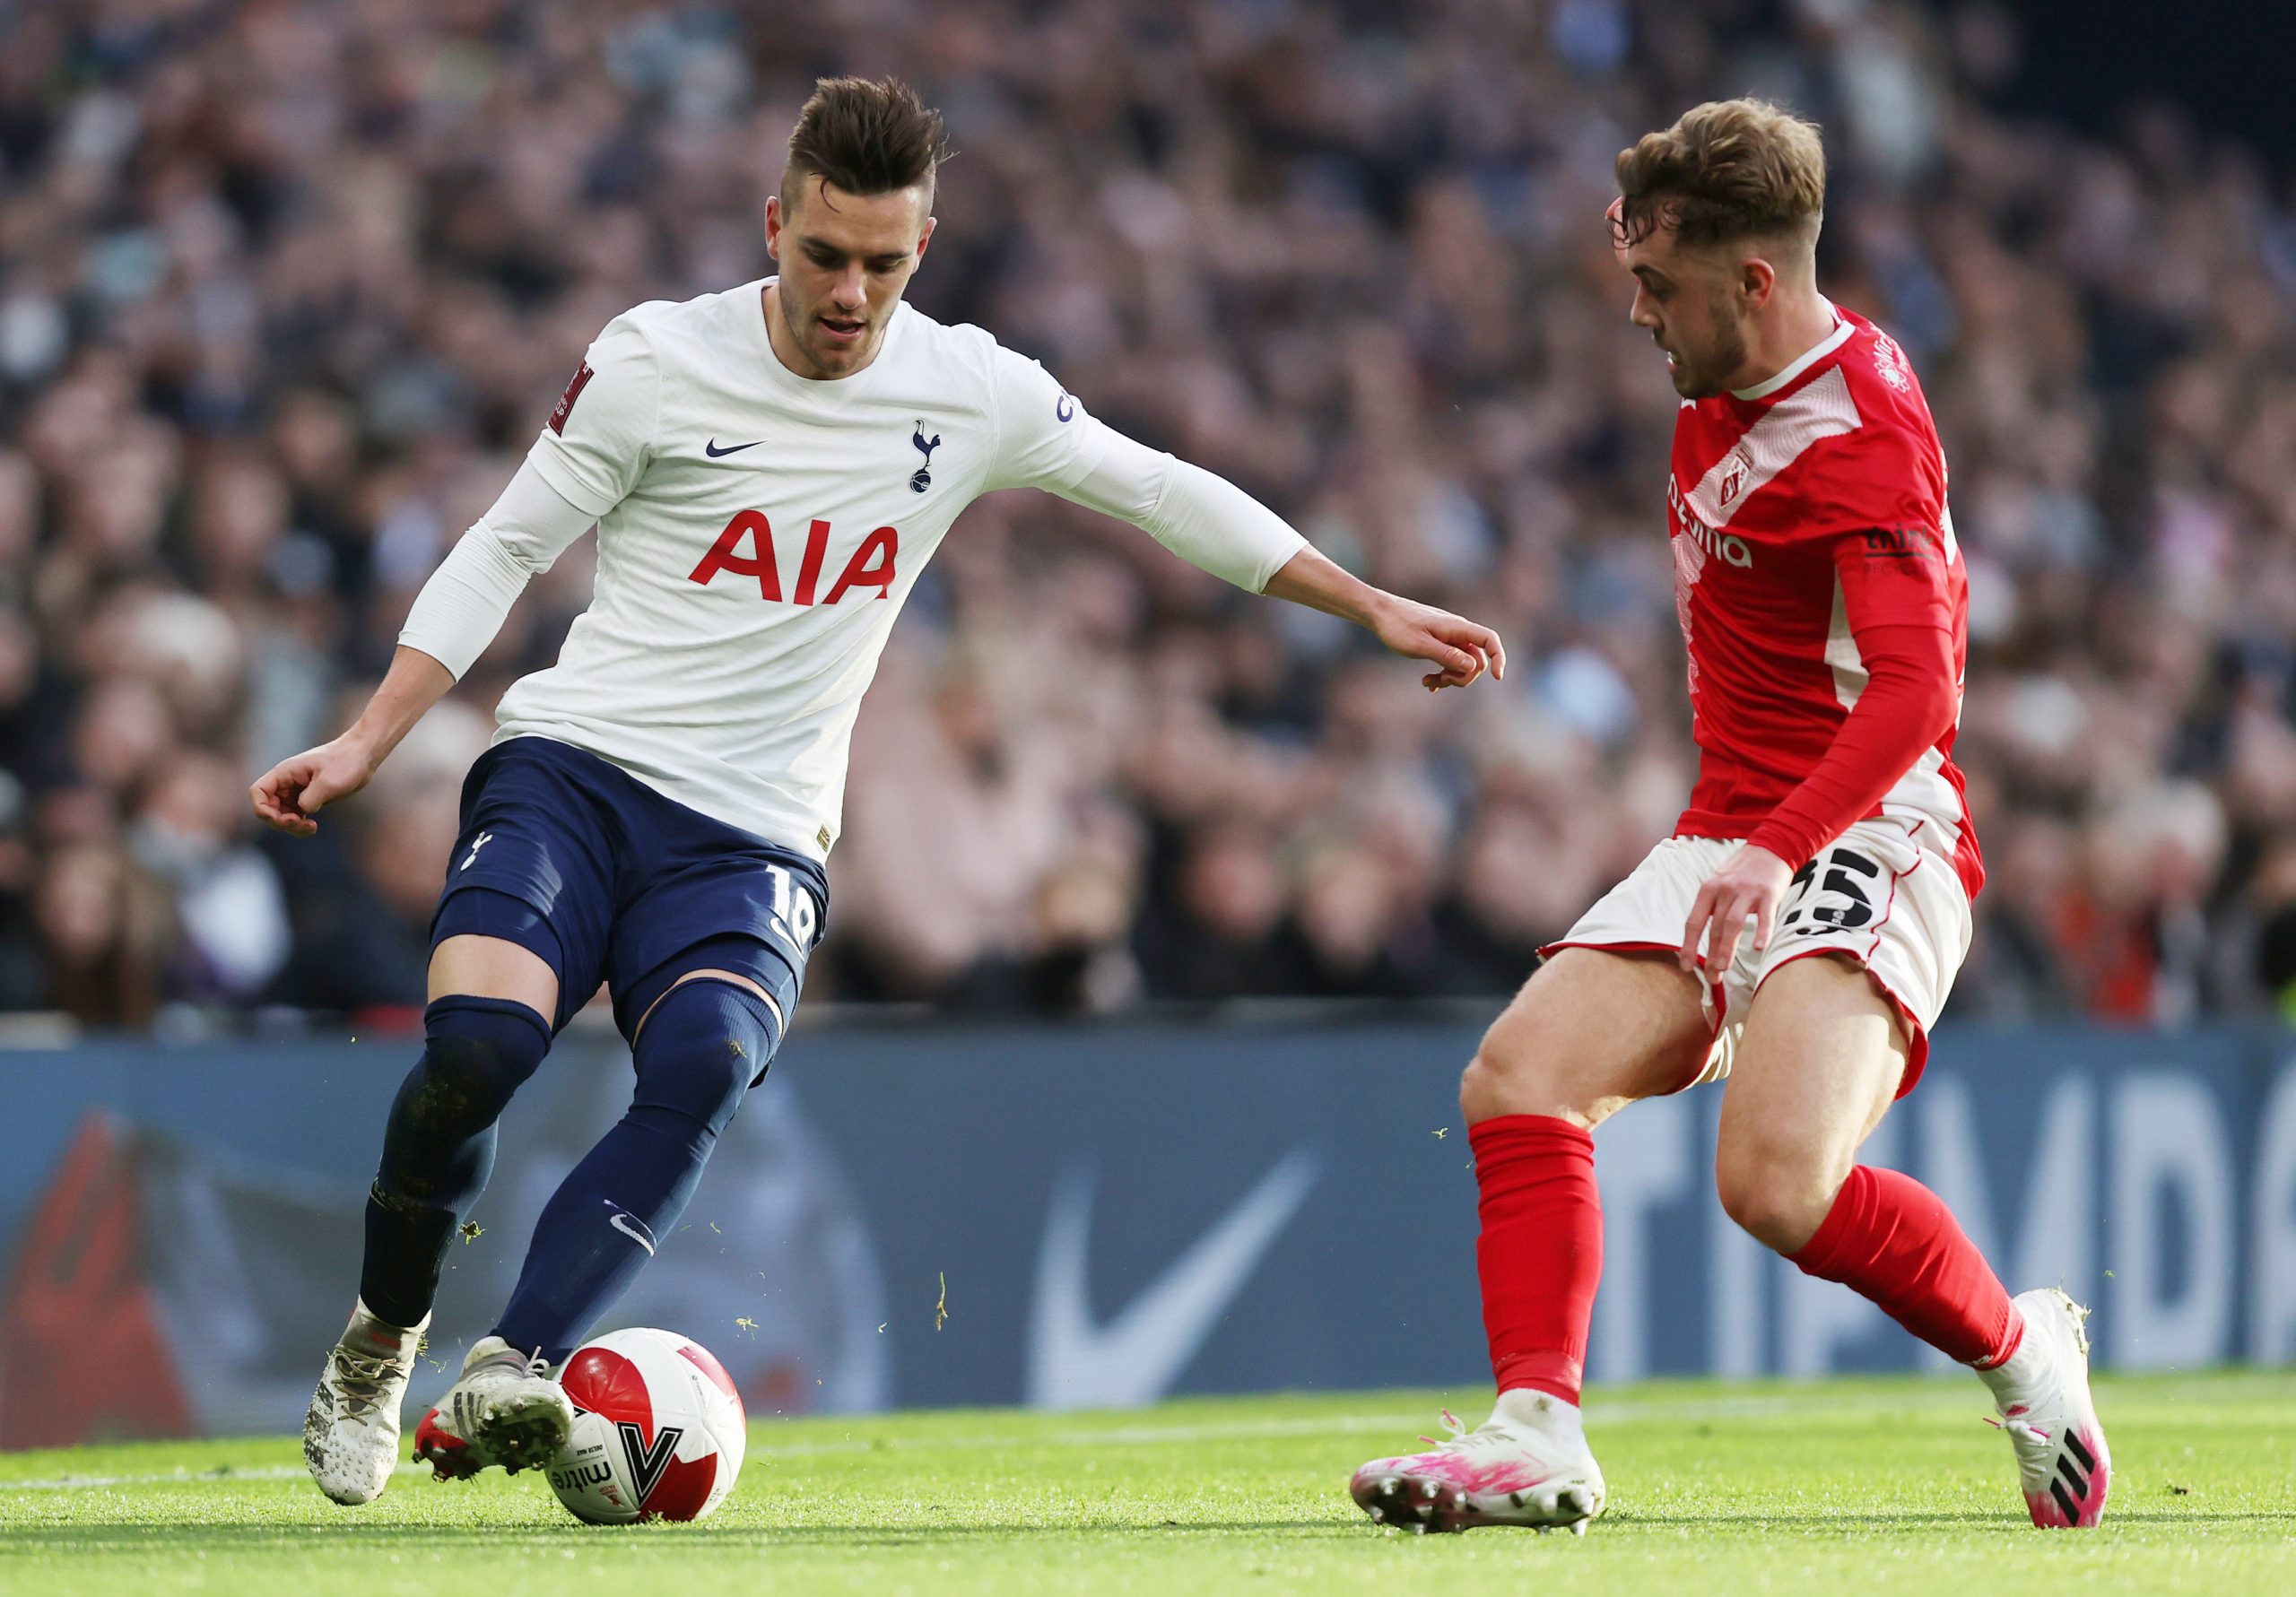 Giovani Lo Celso of Tottenham Hotspur is challenged by Alfie McCalmont of Morecambe.